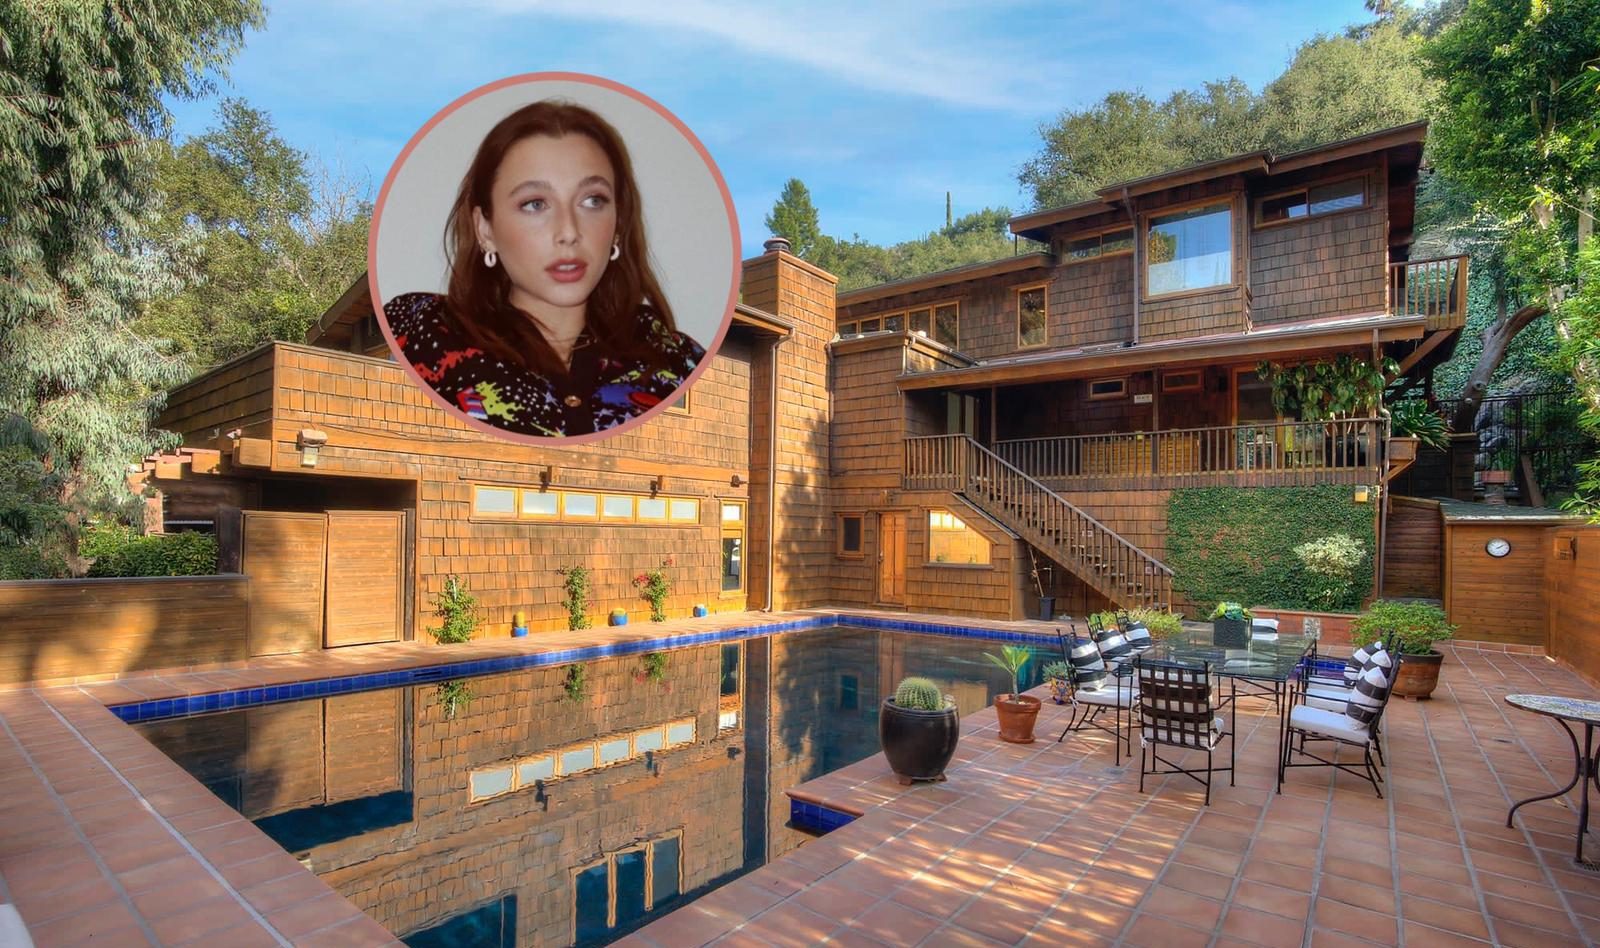 PICTURES: Emma Chamberlain buys $4.3 million Beverly Hills house